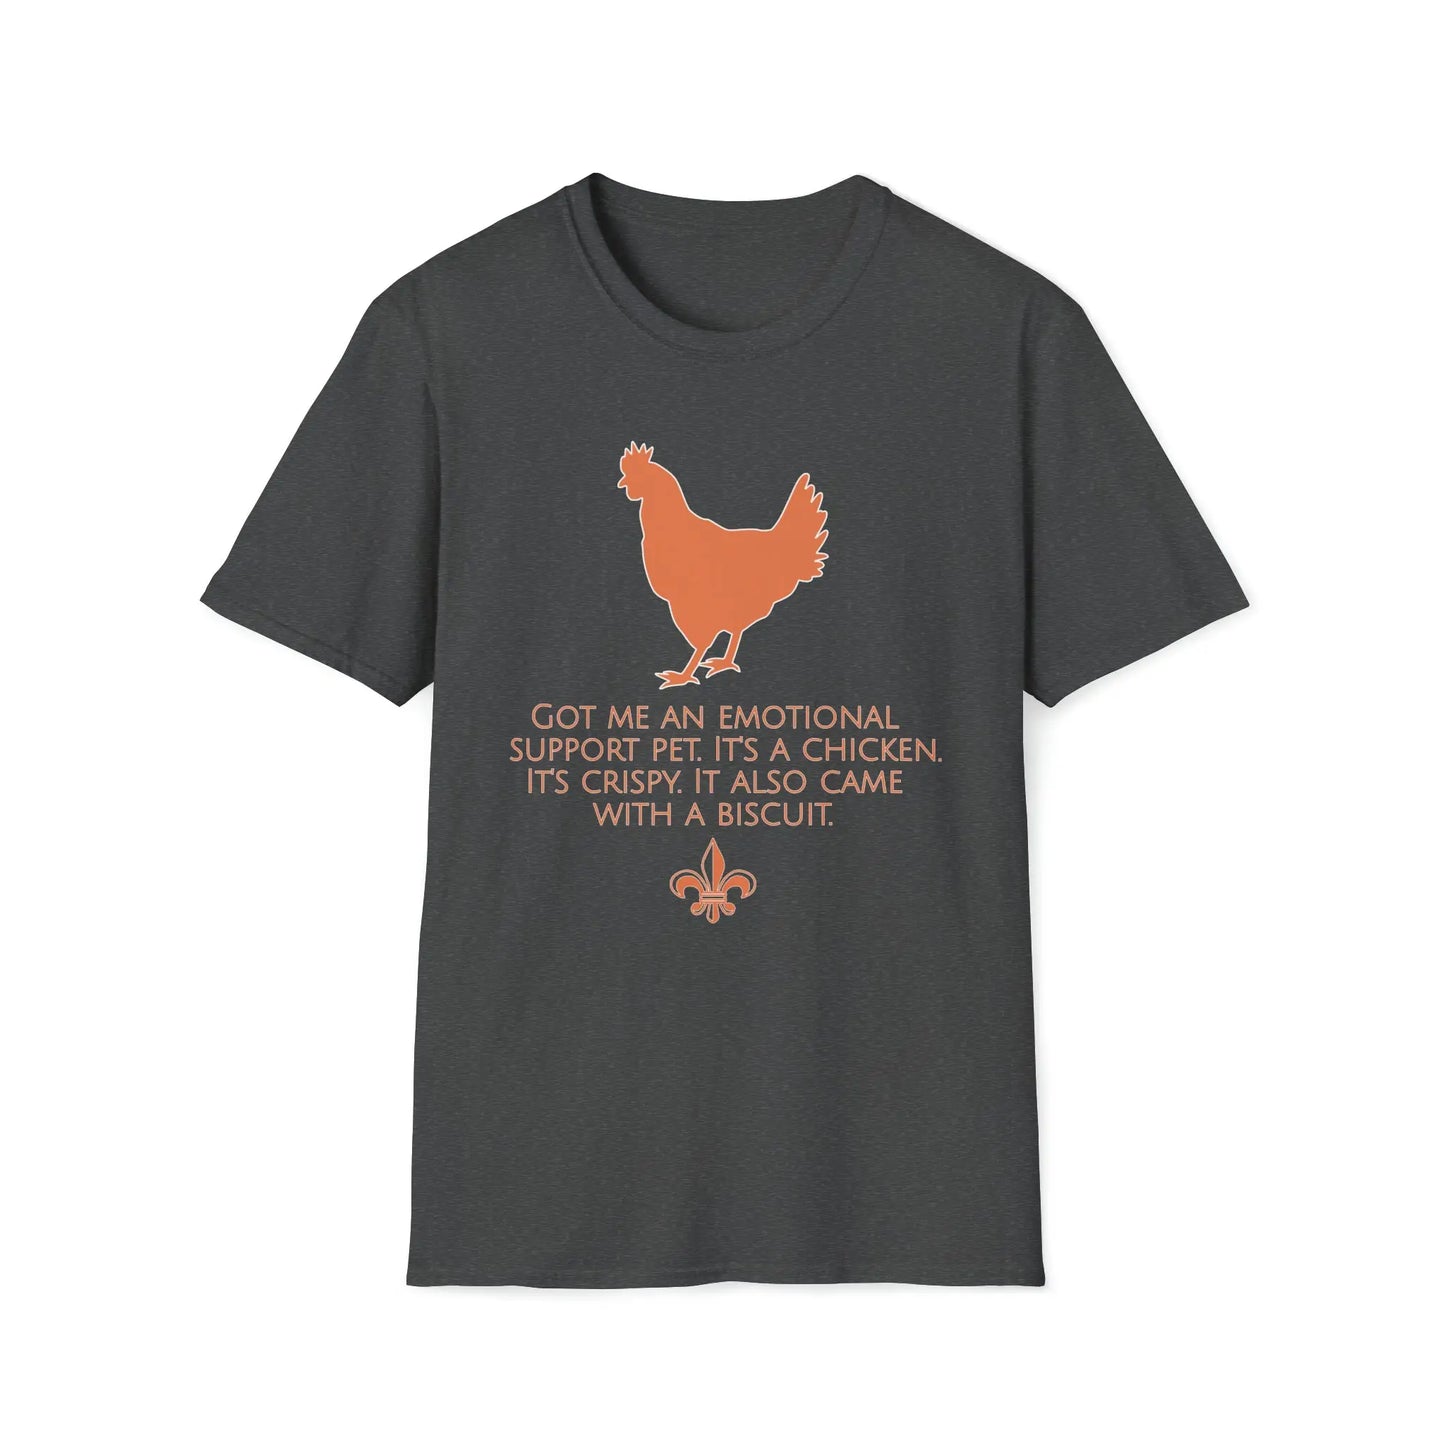 Cluck Yes Women's Softstyle T-Shirt - Wicked Tees